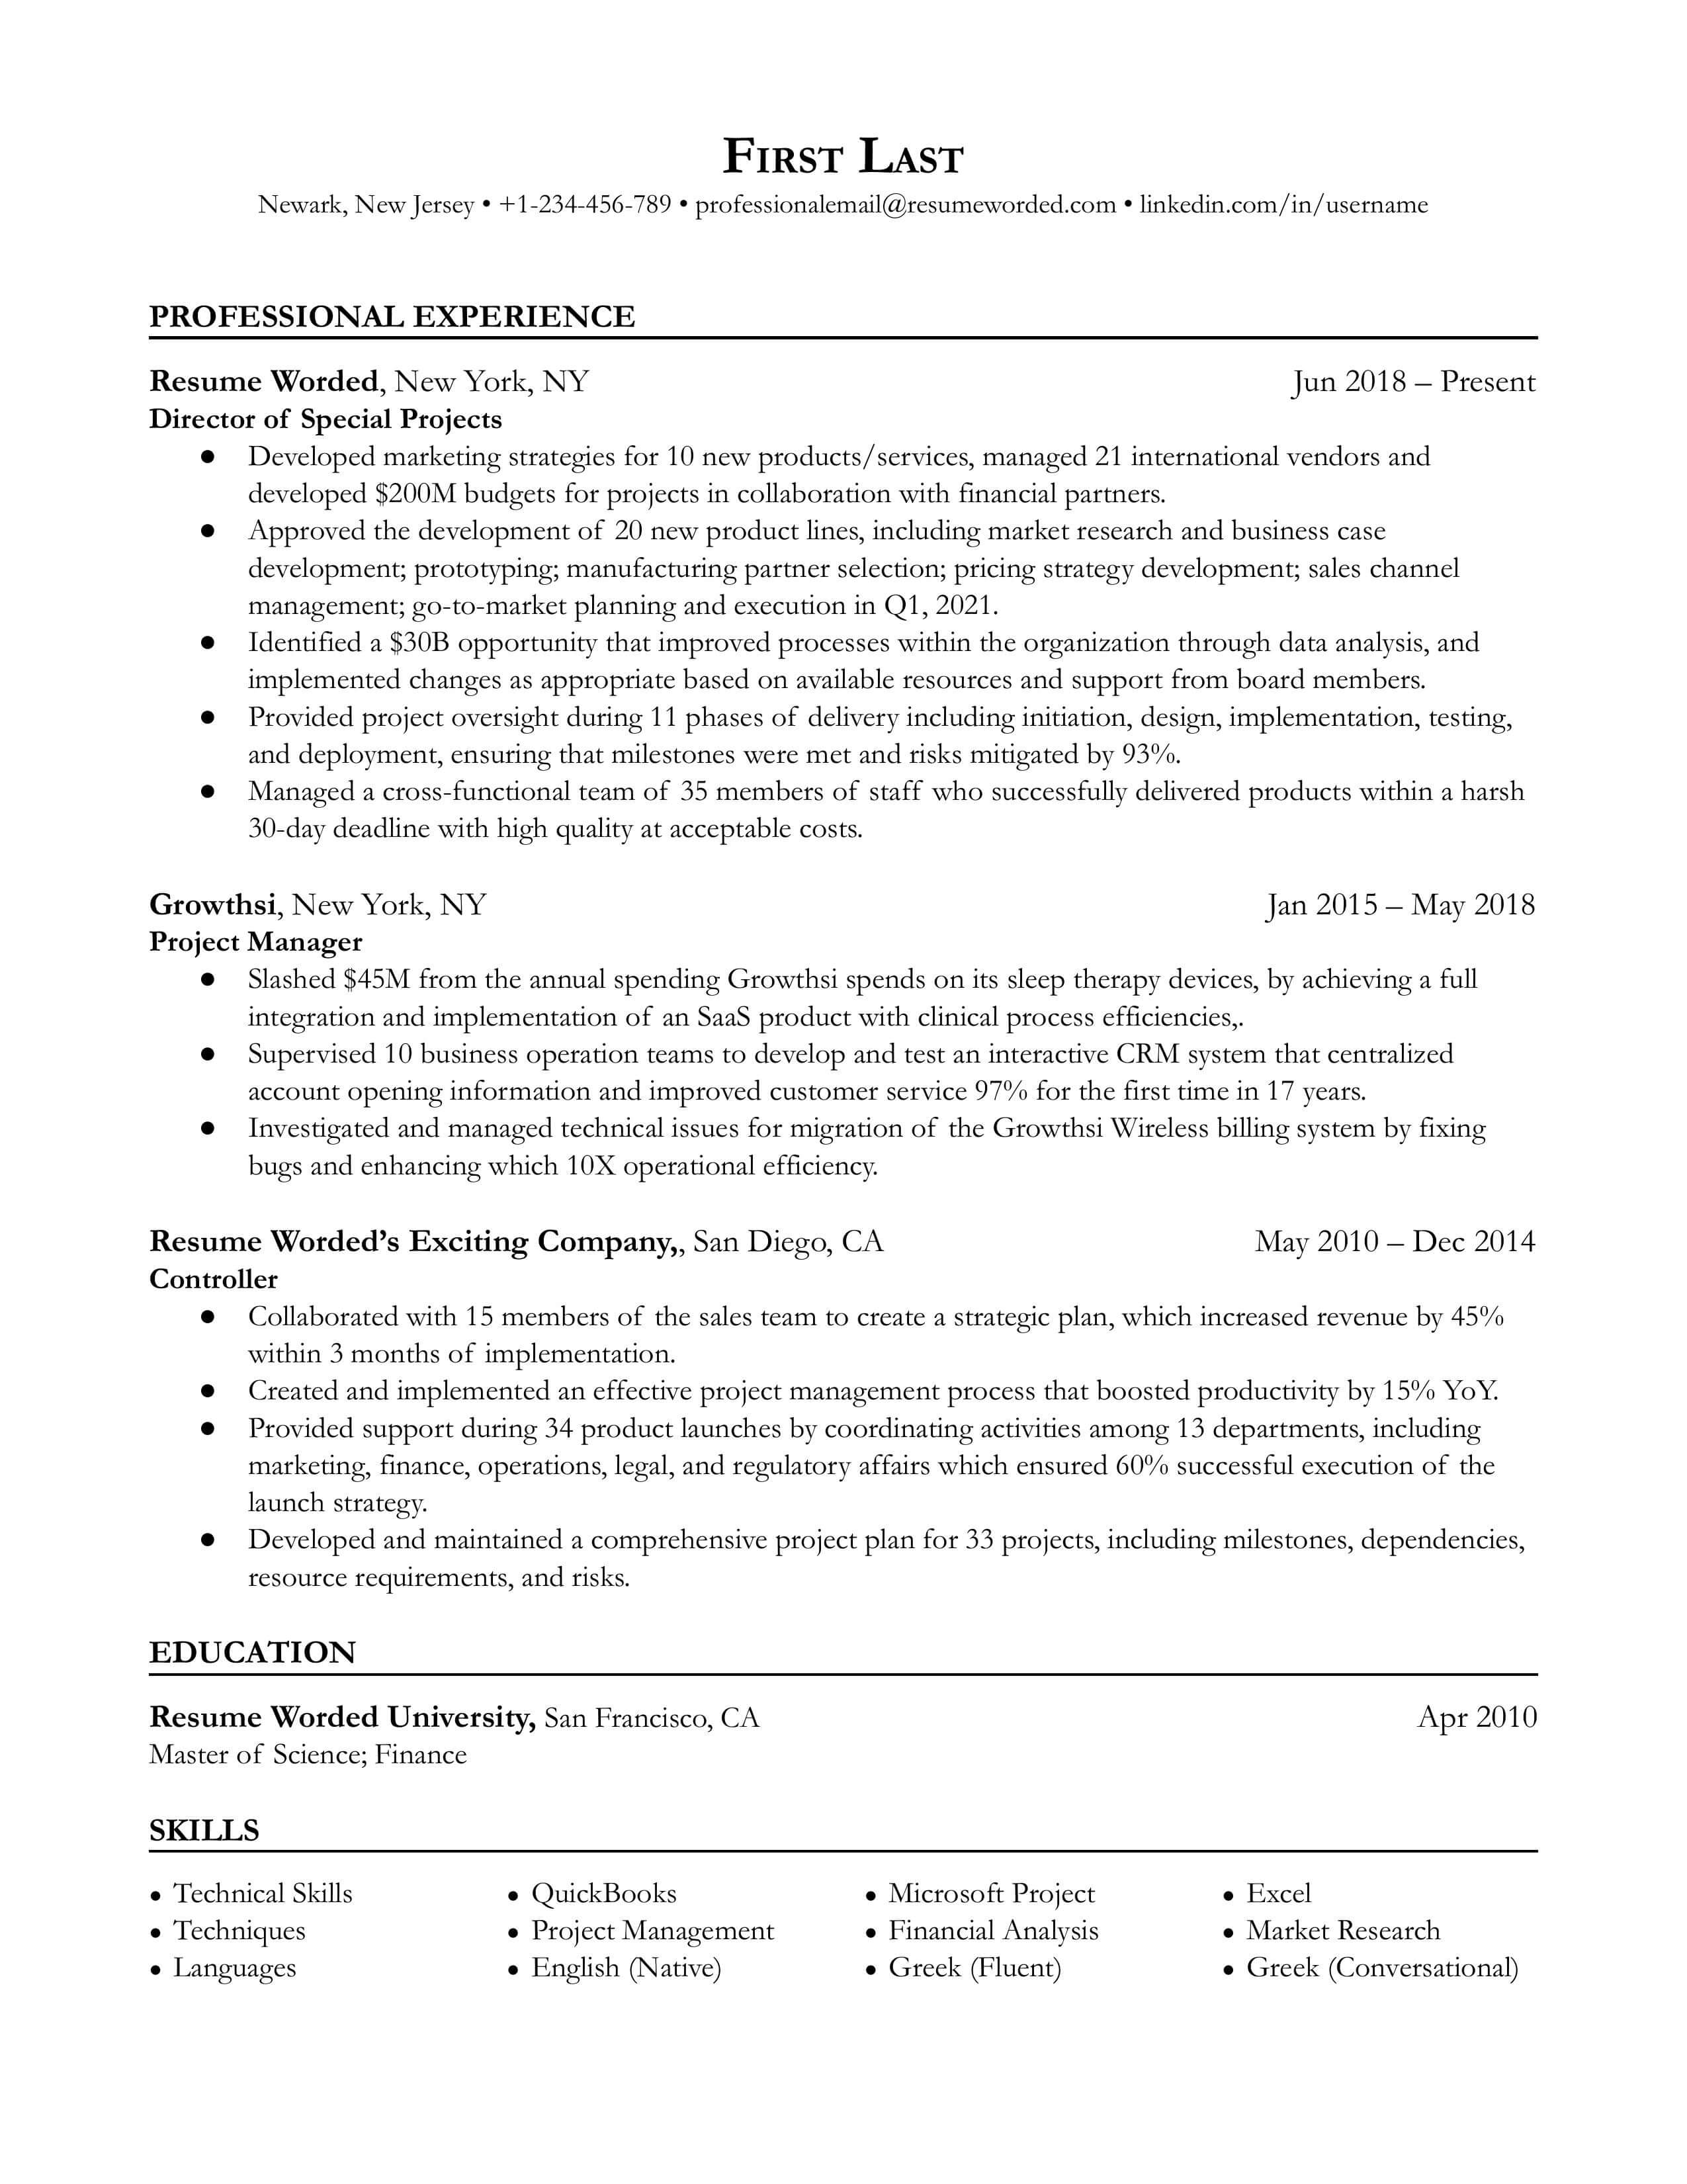 Director of Special Projects Resume Sample